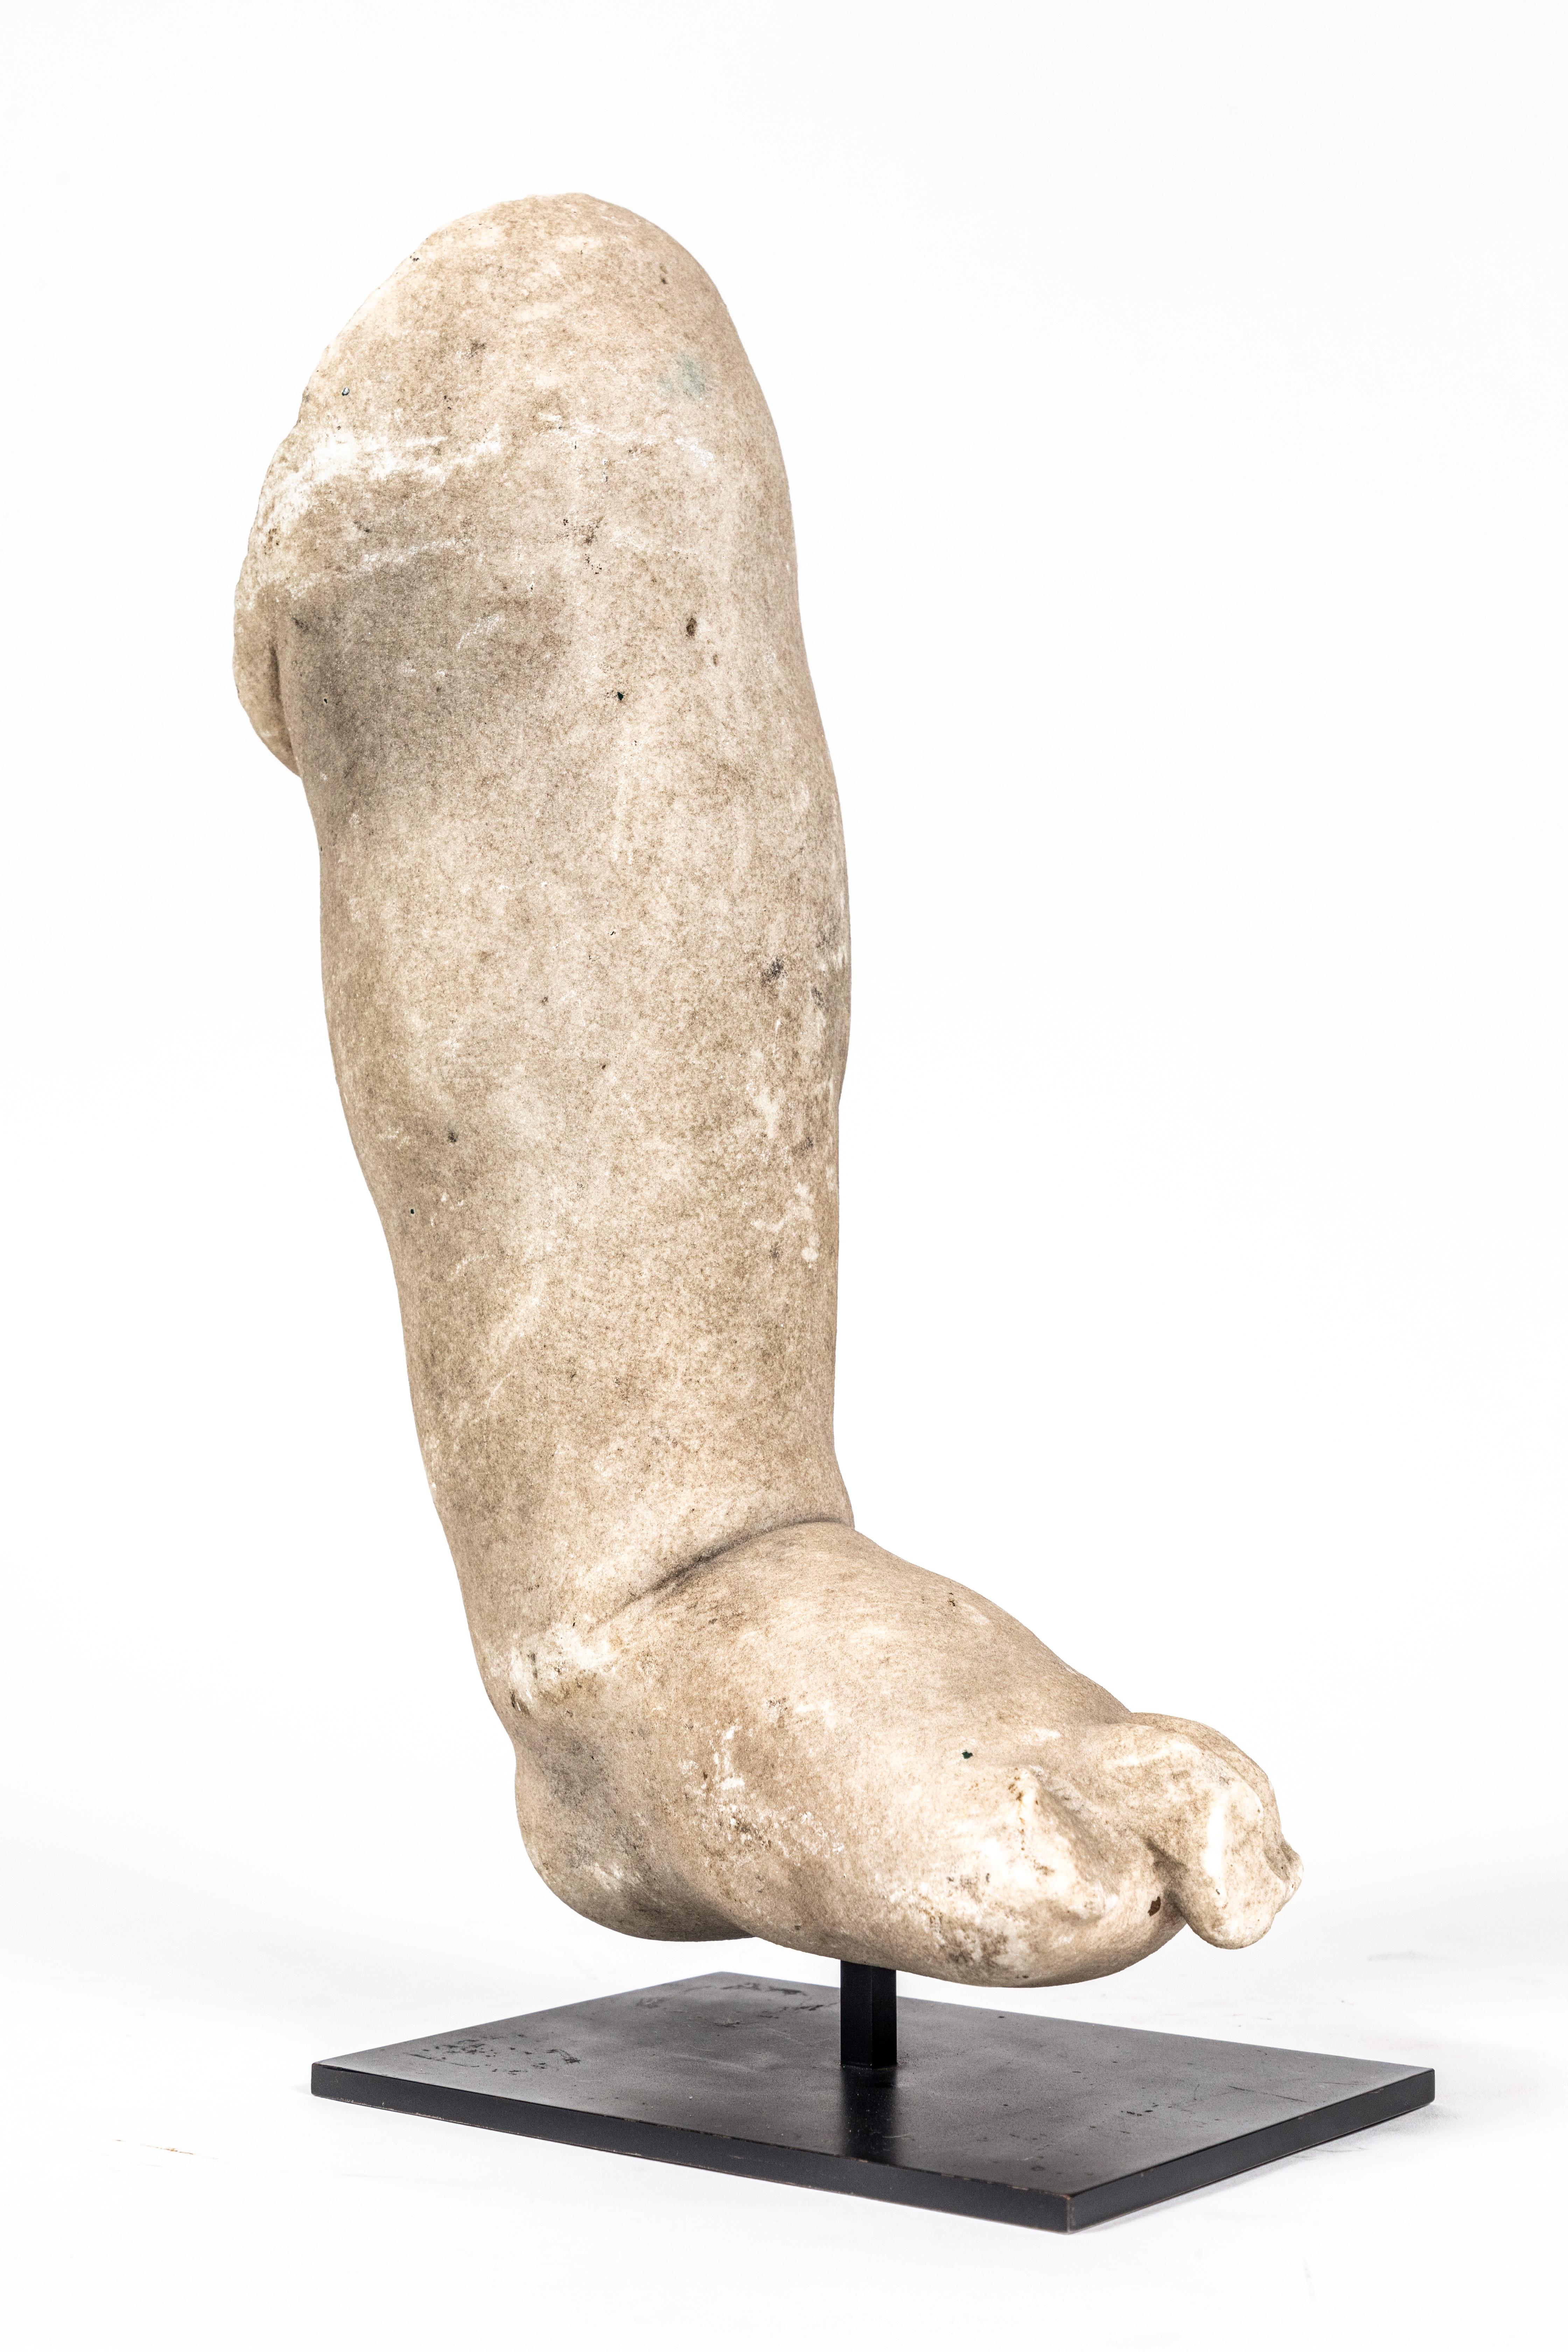 Chic, 15th Century, Roman marble fragment of a left foot and calf mounted on a custom iron stand.